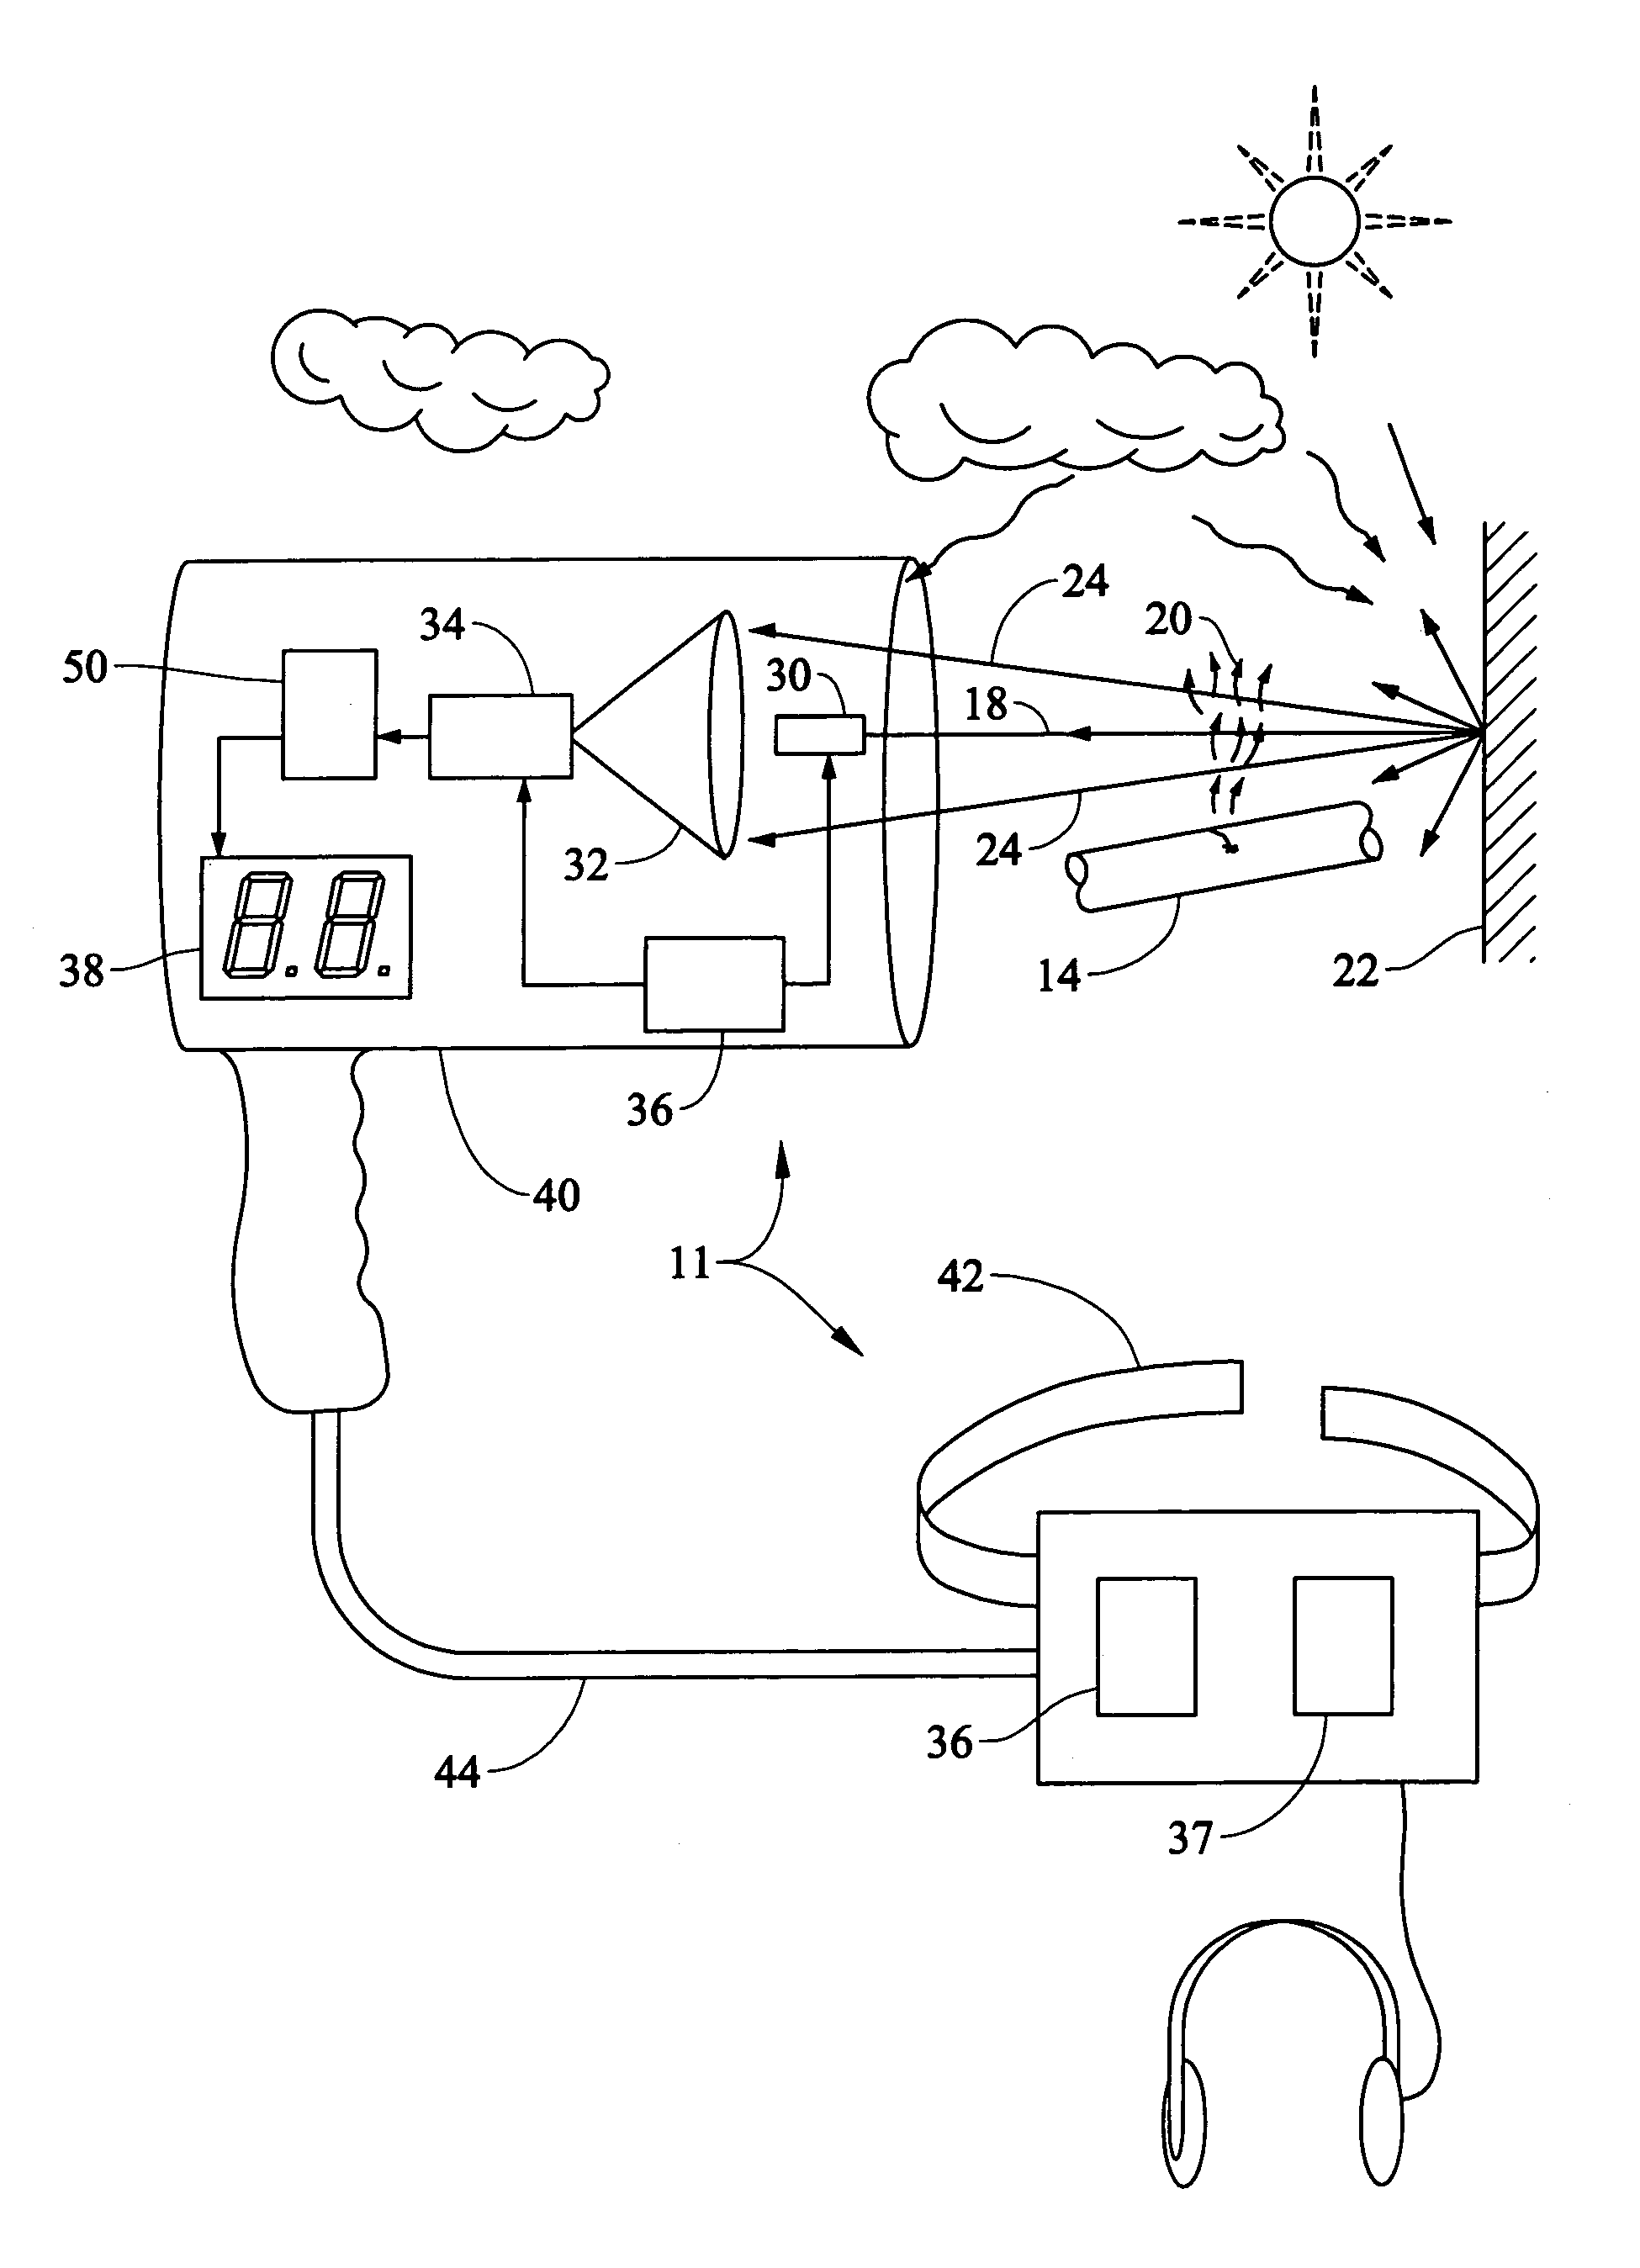 Method and apparatus for laser-based remote methane leak detection